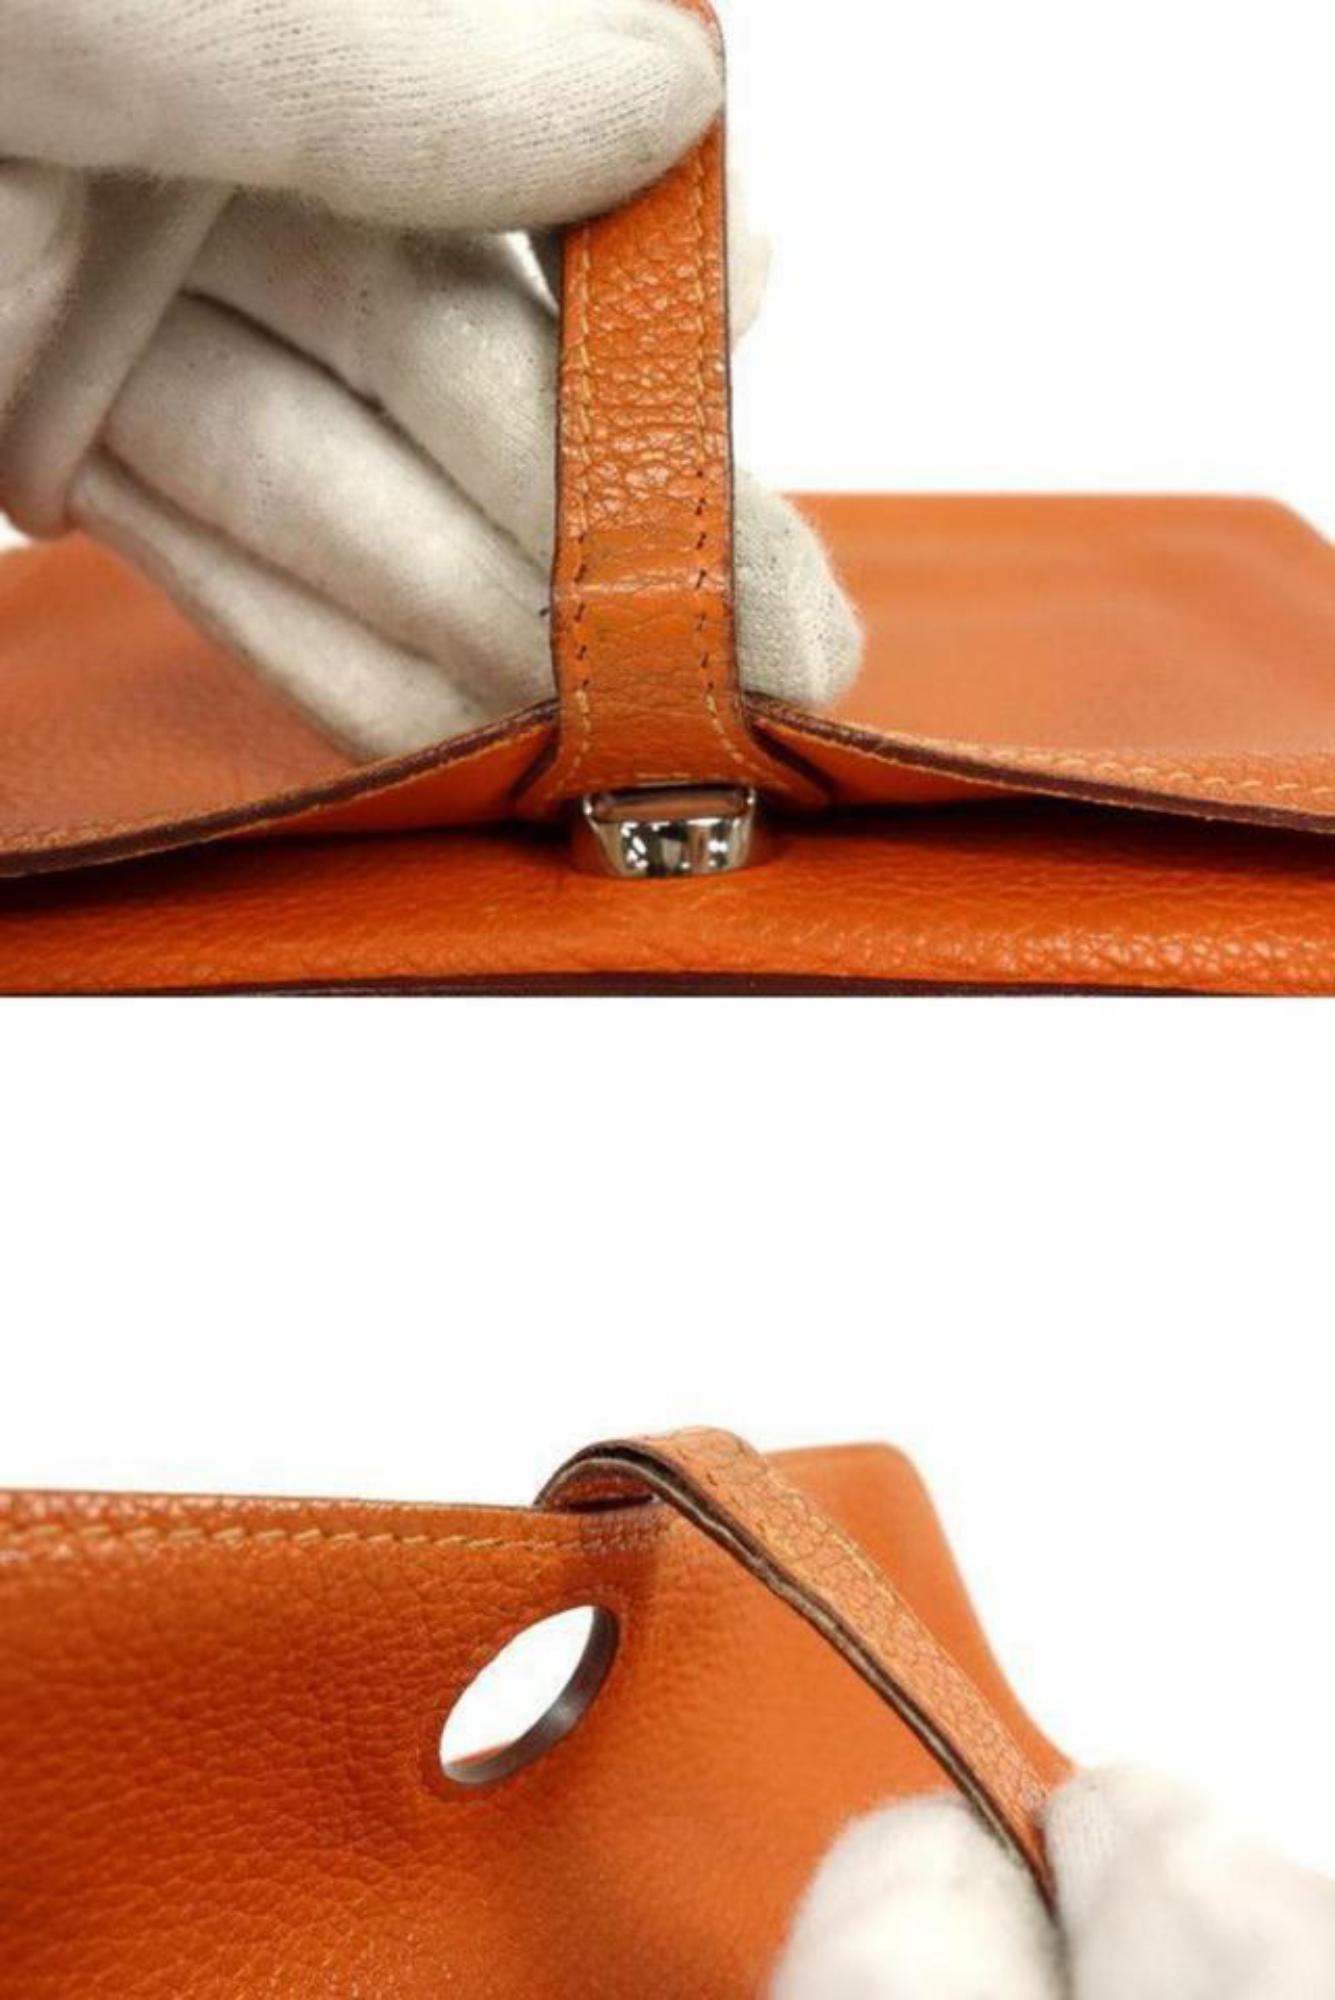 Hermès Orange Togo Leather Dogon Wallet 232H857
Date Code/Serial Number:  F in a square 
Made In: France 
Measurements: Length: 7.75